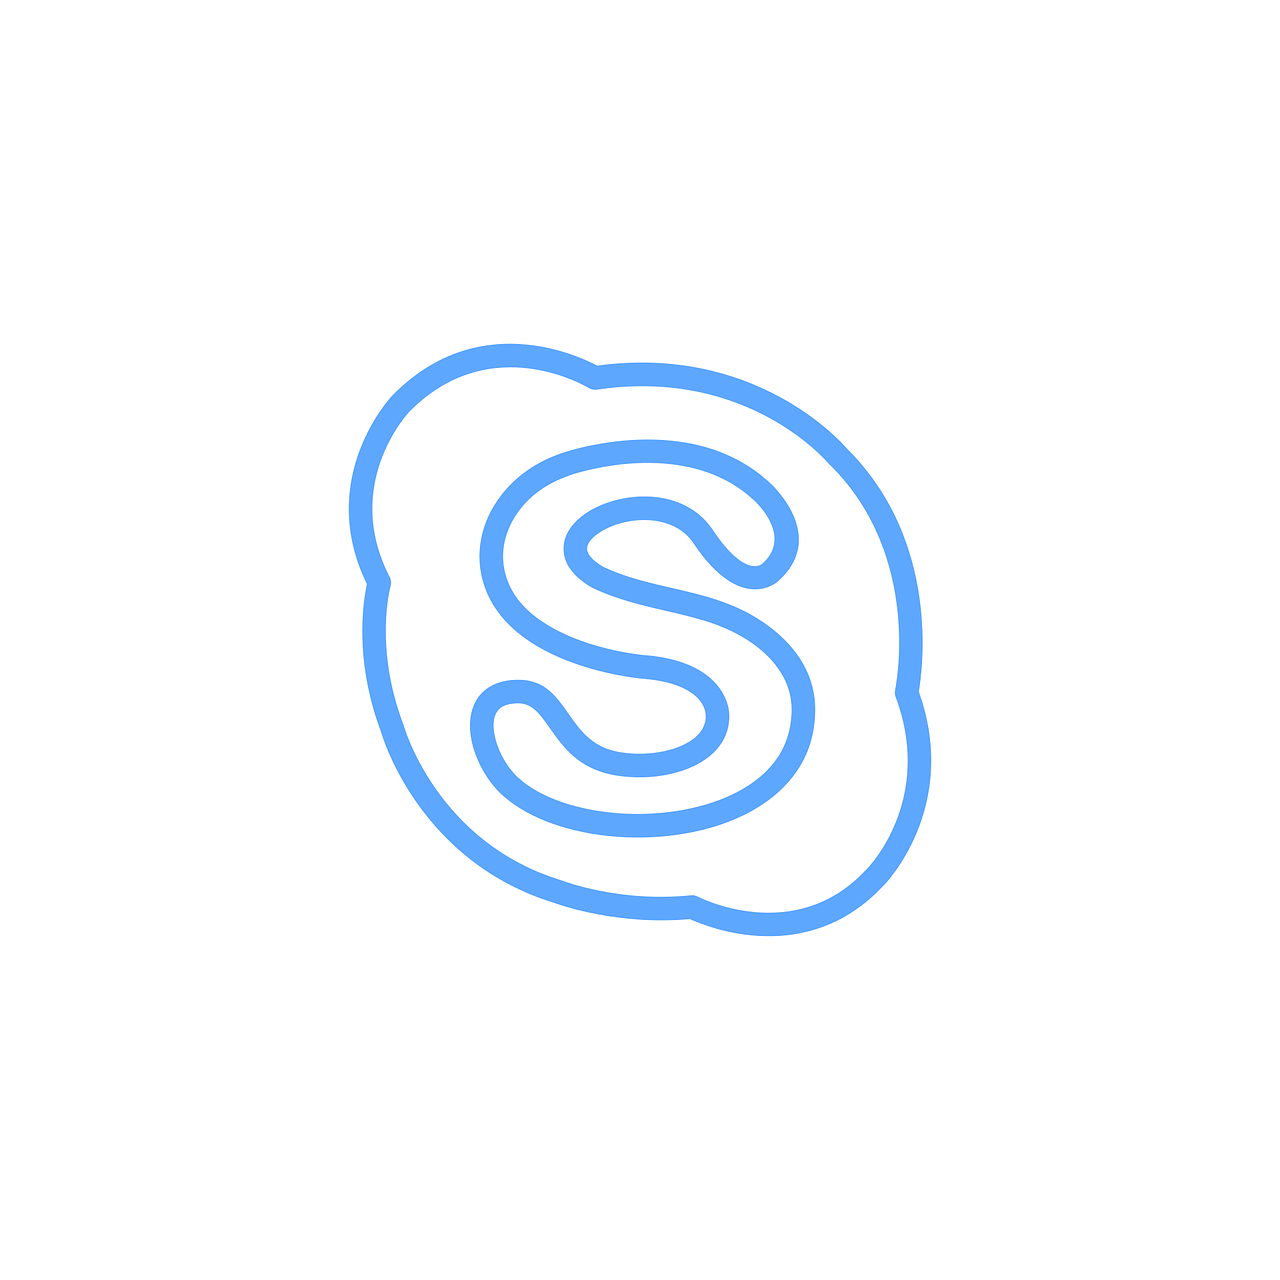 a blue outline of a letter s on a white background, by Seb McKinnon, reddit, stuckism, corporate phone app icon, brains, 🐋 as 🐘 as 🤖 as 👽 as 🐳, smiley profile